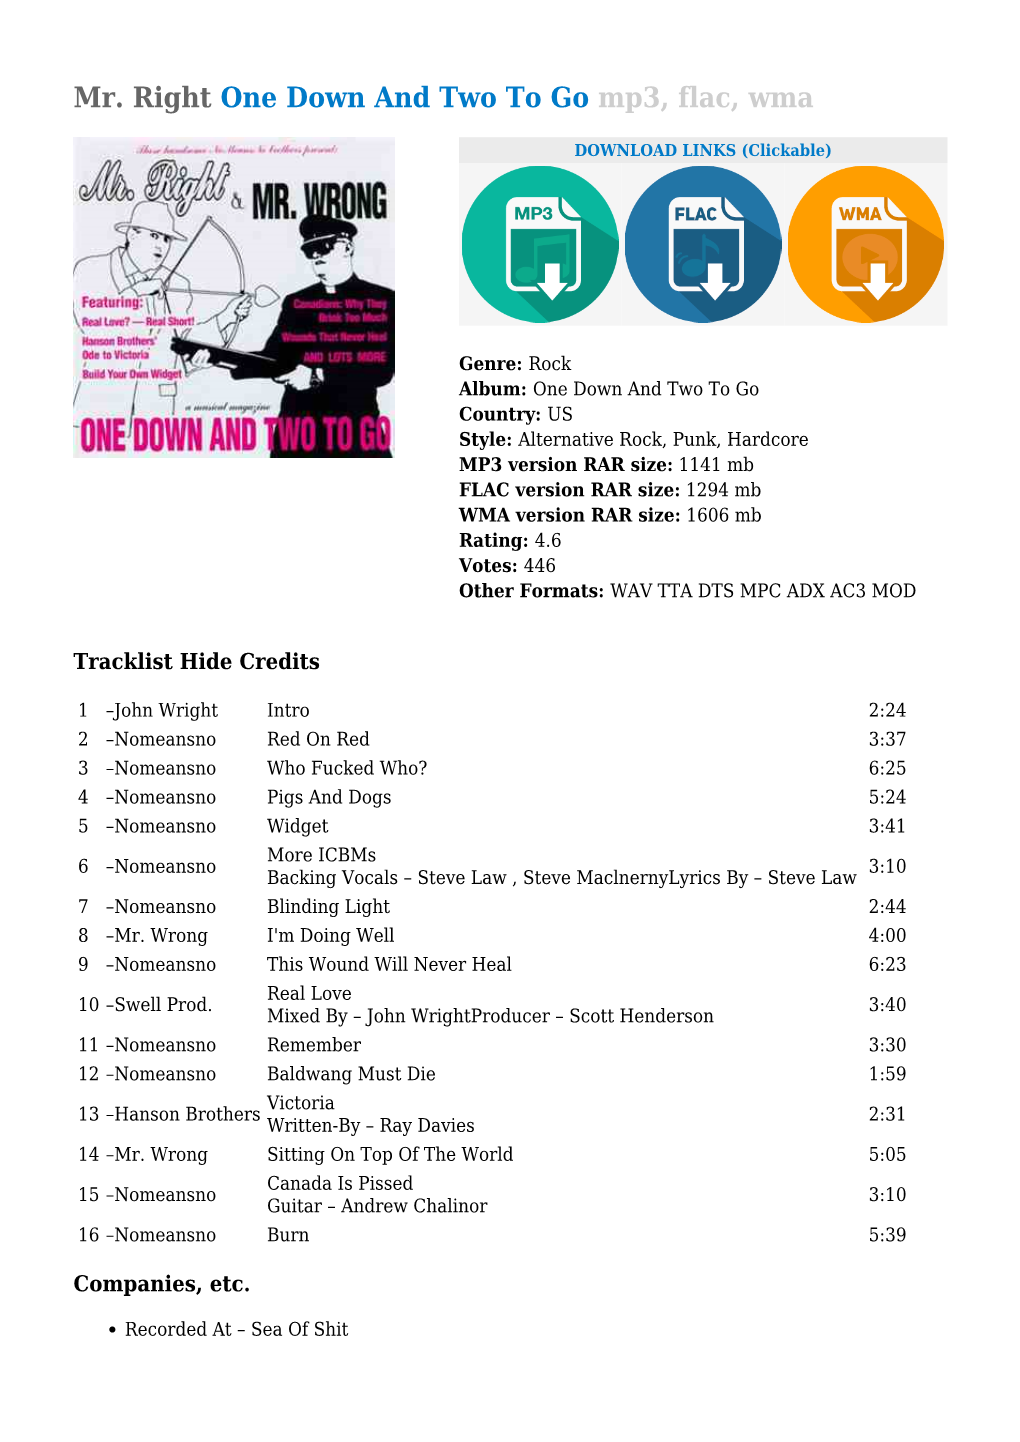 Mr. Right One Down and Two to Go Mp3, Flac, Wma